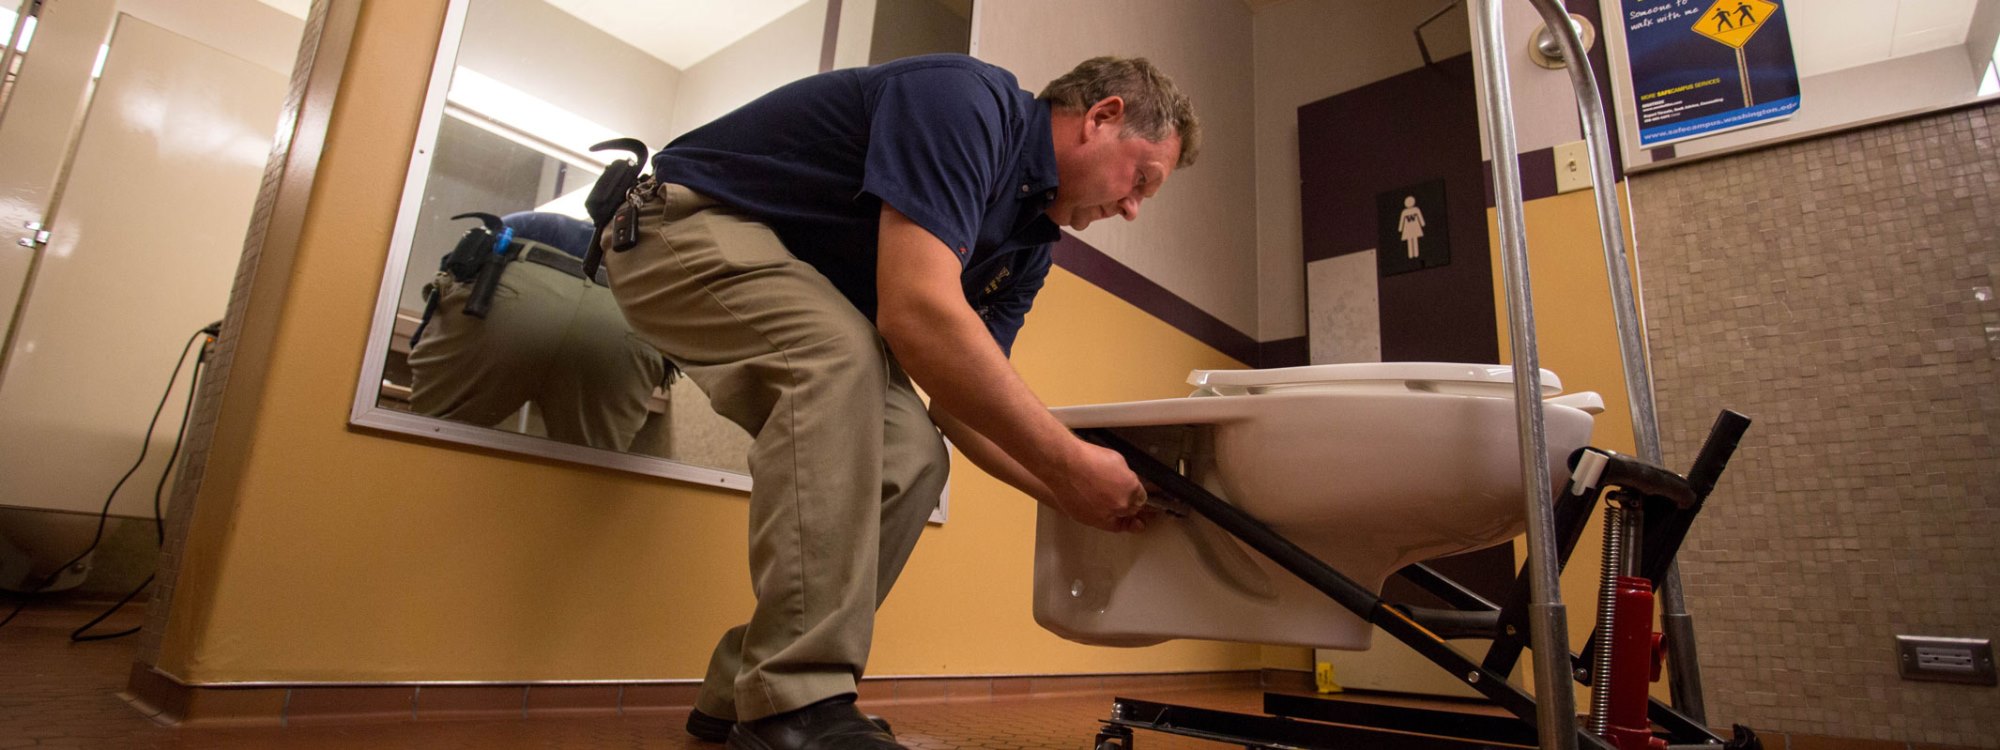 Peter Gorokhovskiy, a Facilities operations maintenance specialist from UW Tower, works to replace an older toilet model at the Tower in Seattle, Wash.